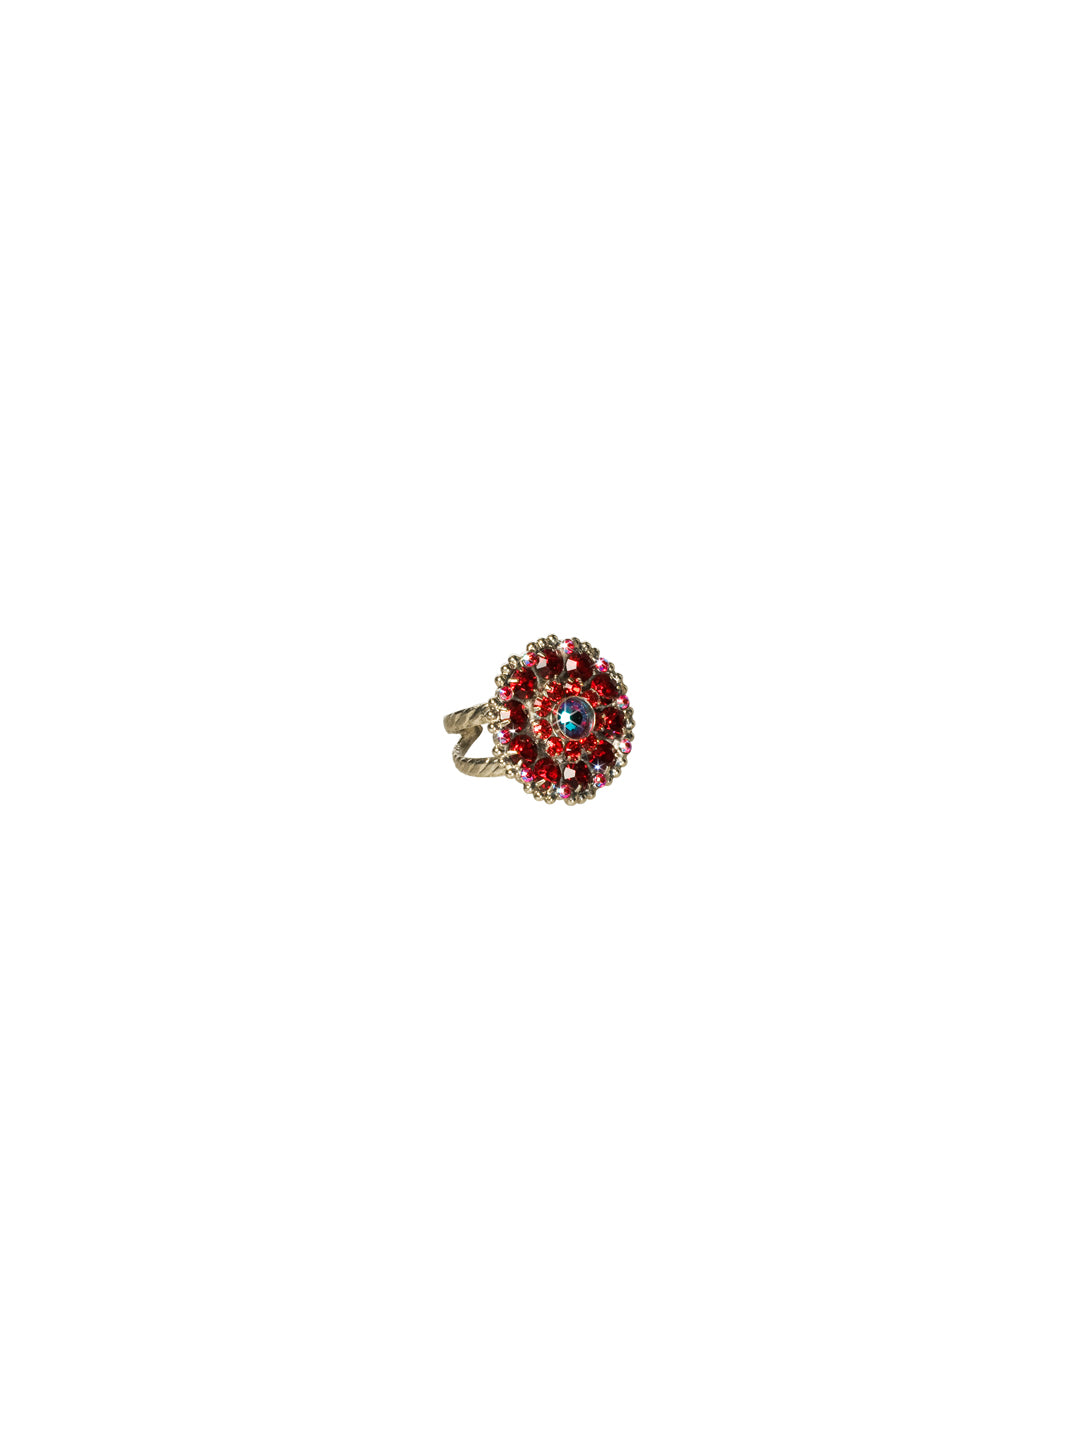 Charming Crystal Bloom Cocktail Ring - RBT78ASCB